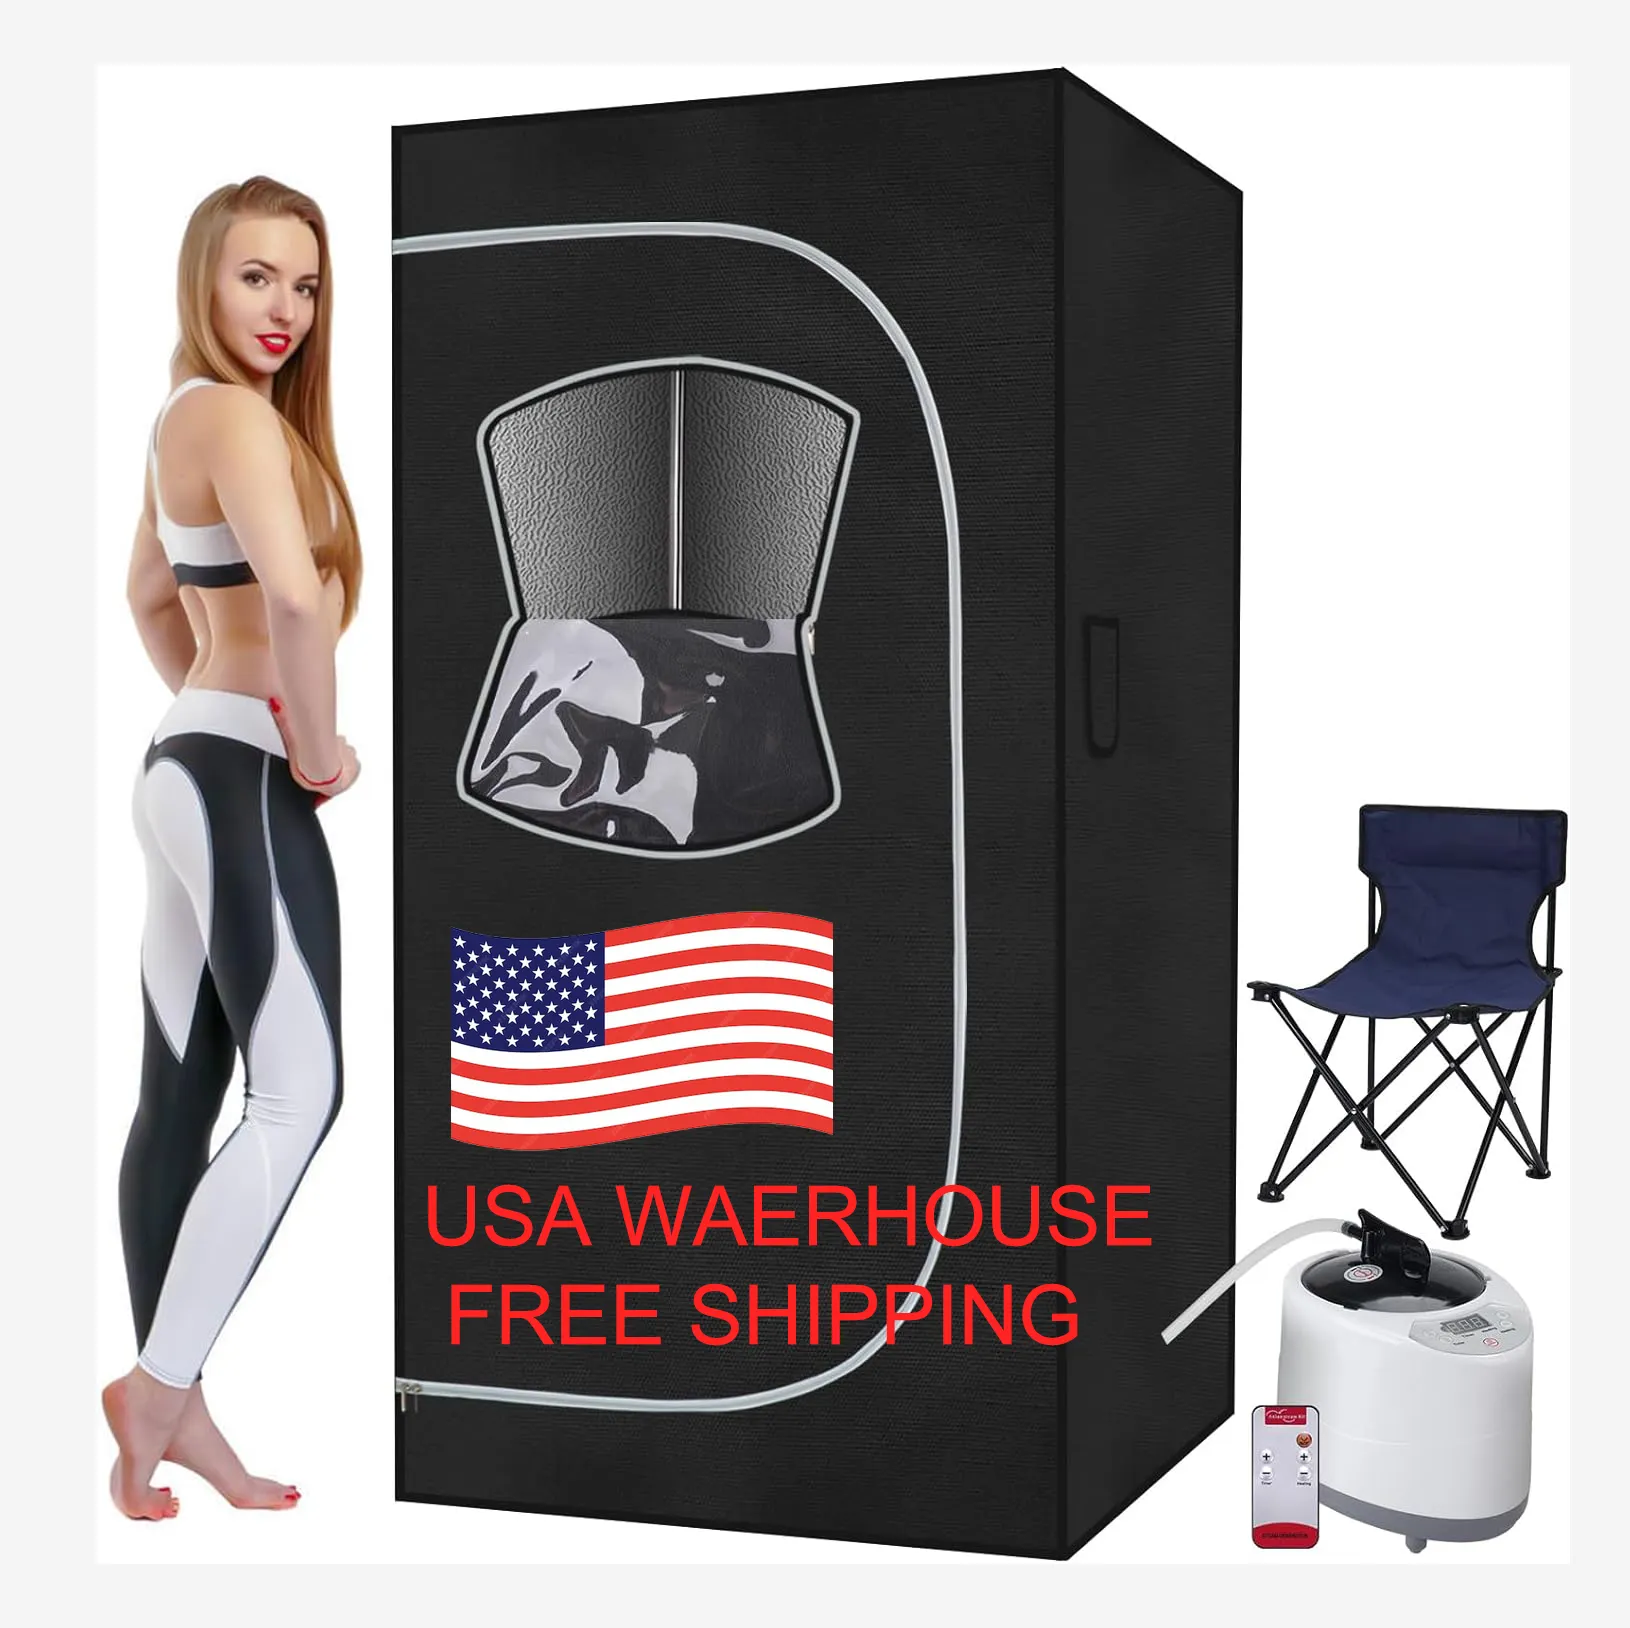 USA Warehouse Free Shipping Home Portable Steam Sauna Suit Full Body with 2.6L Steamer Foldable Remote Control Steam Saunas Tent